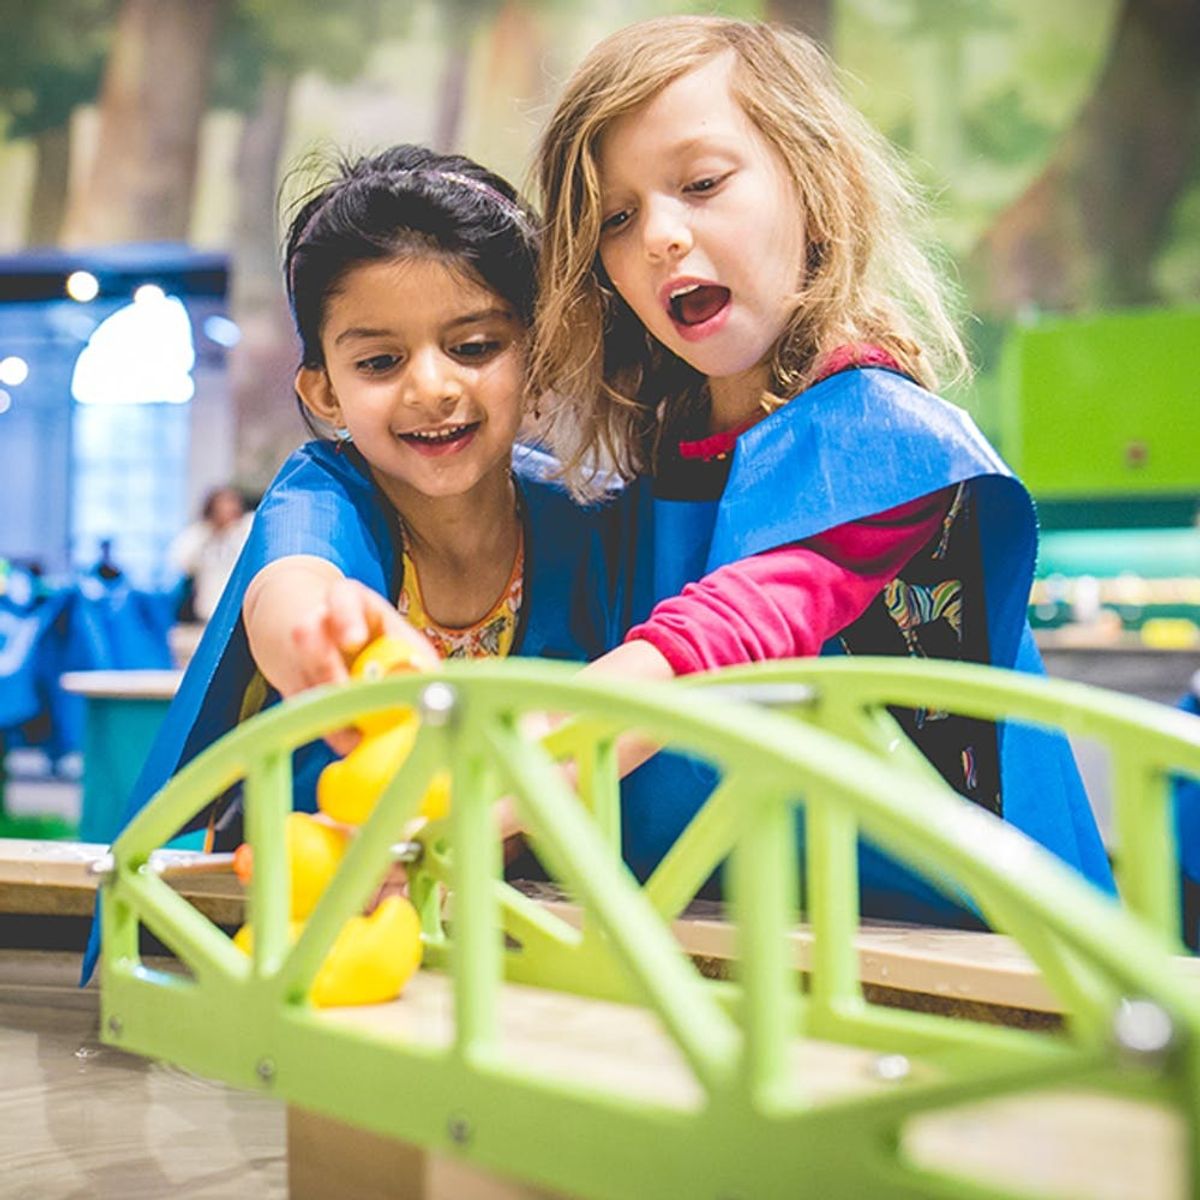 6 Children’s Museums Around the US That Adults Will Also Enjoy